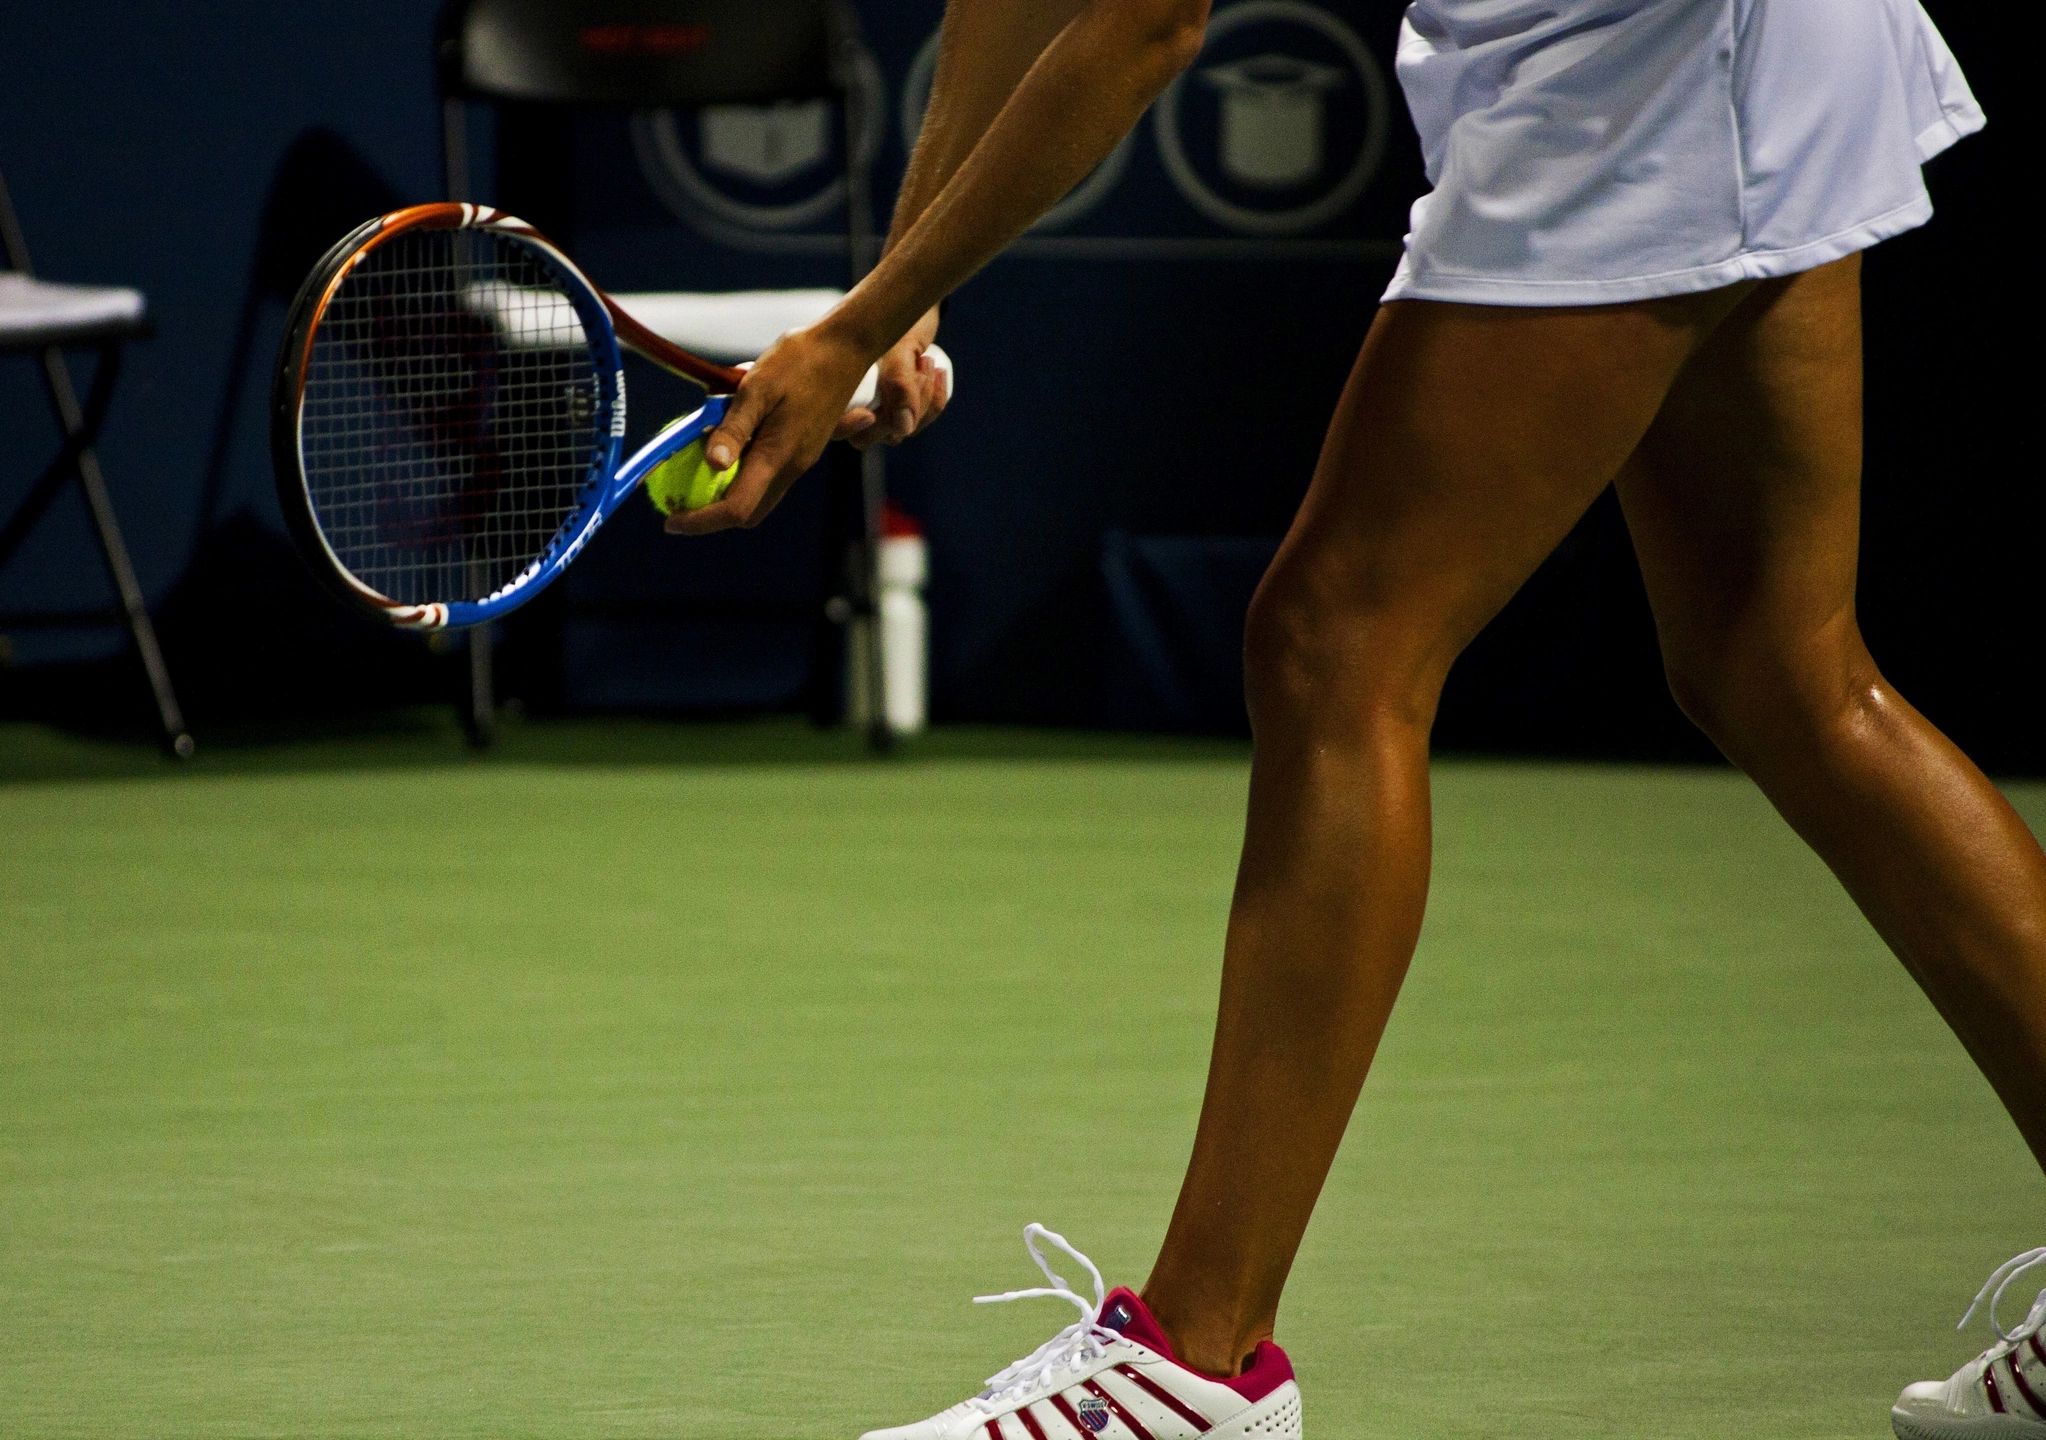 A tennis player about to serve the ball